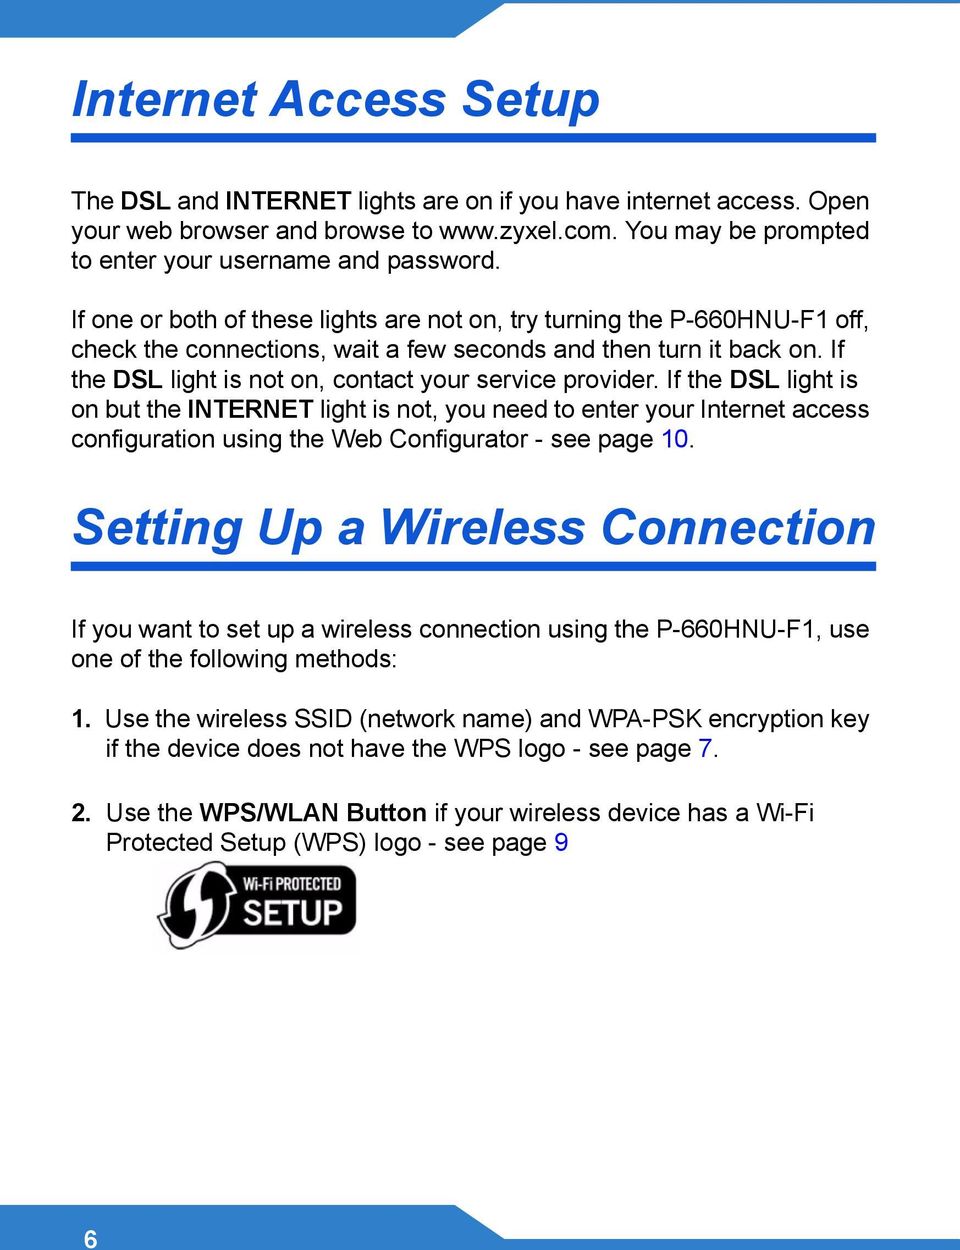 If the DSL light is not on, contact your service provider.